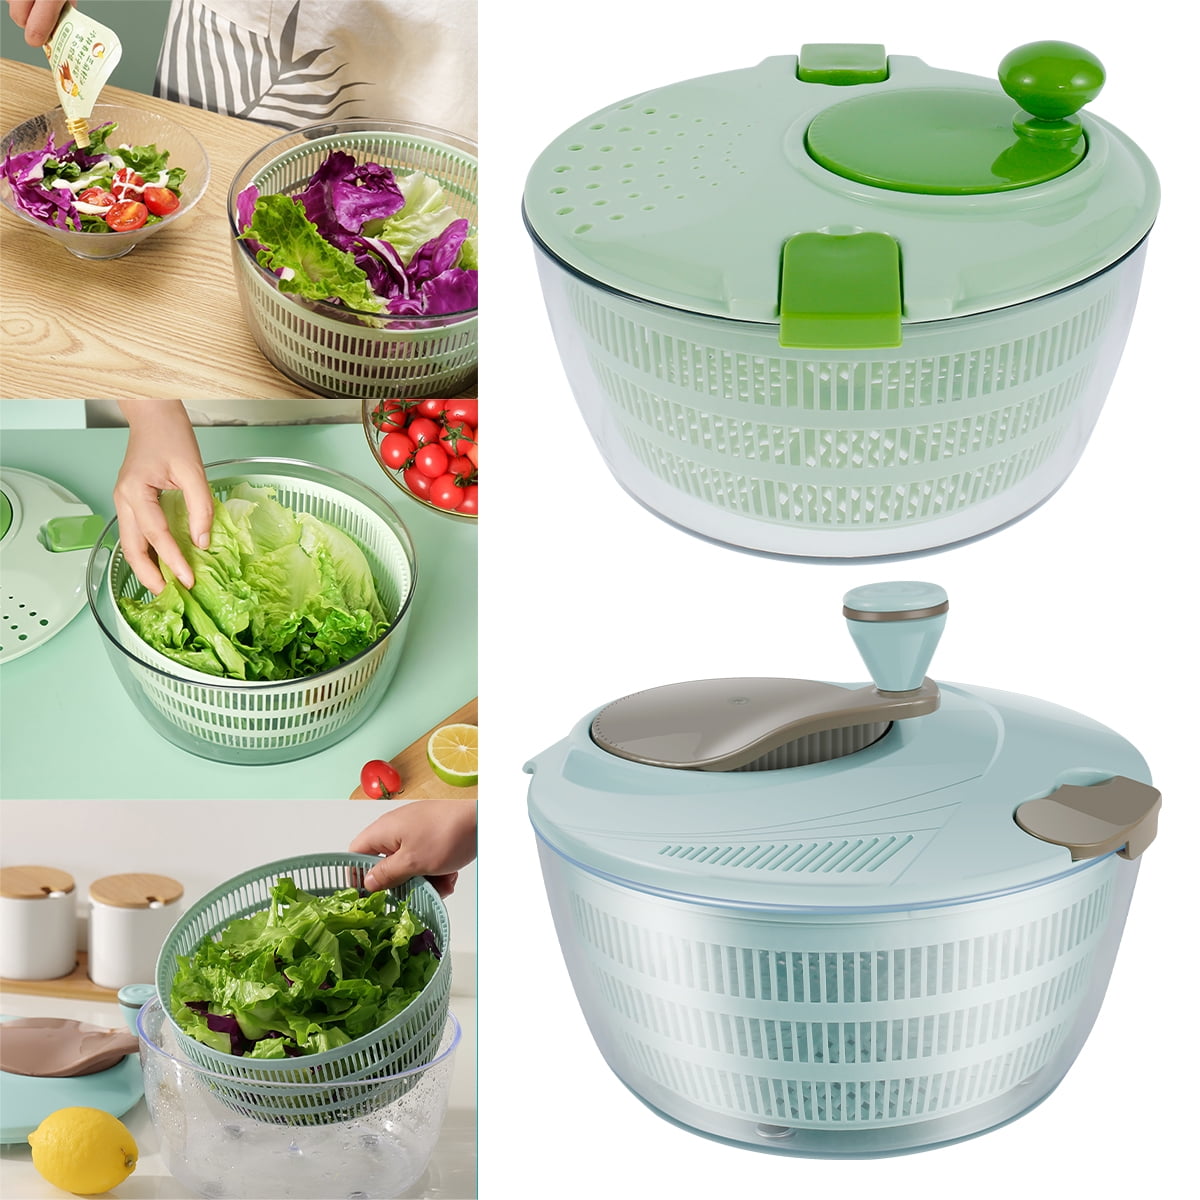  Joined Salad Spinner with Drain, Bowl, and Colander - Quick and  Easy Multi-Use Lettuce Spinner, Vegetable Dryer, Fruit Washer, Pasta and  Fries Spinner - 3.7 Qt: Home & Kitchen